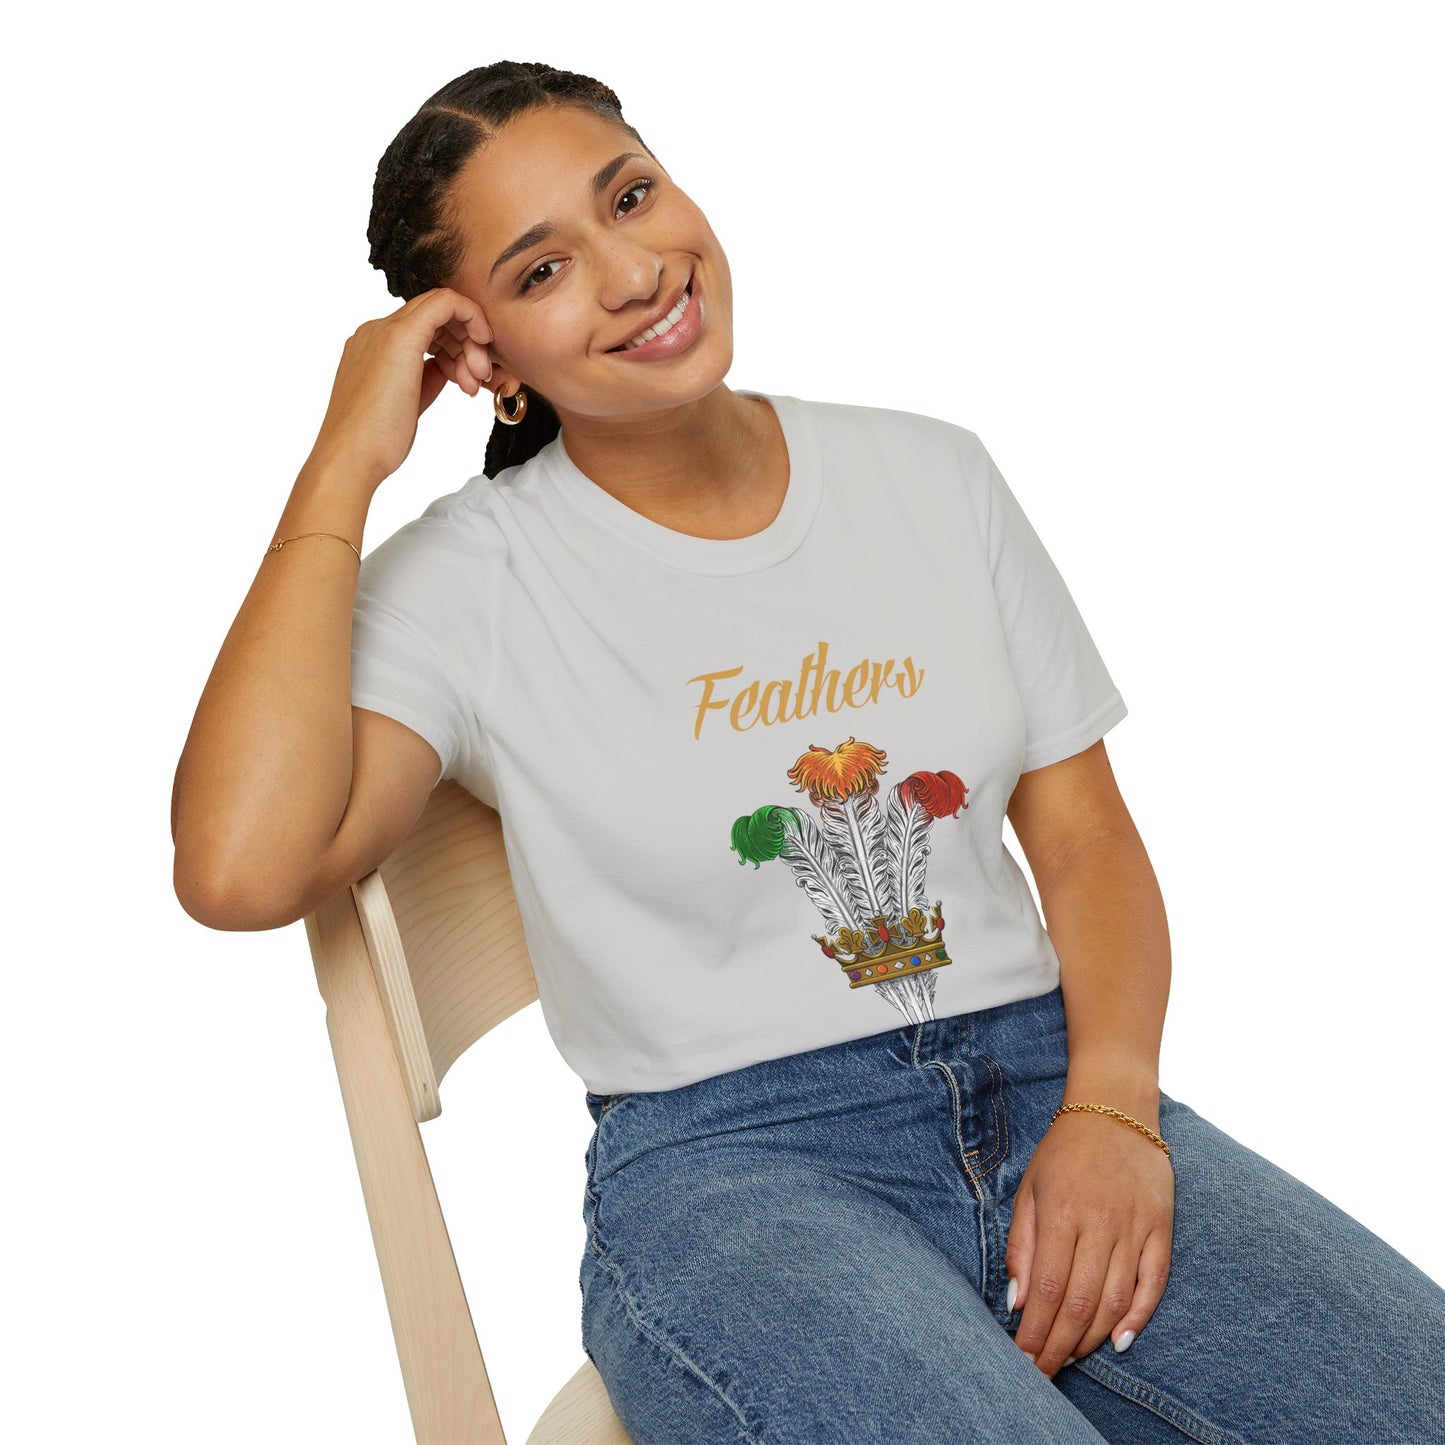 Feathers and  Crowns Logo T-Shirt